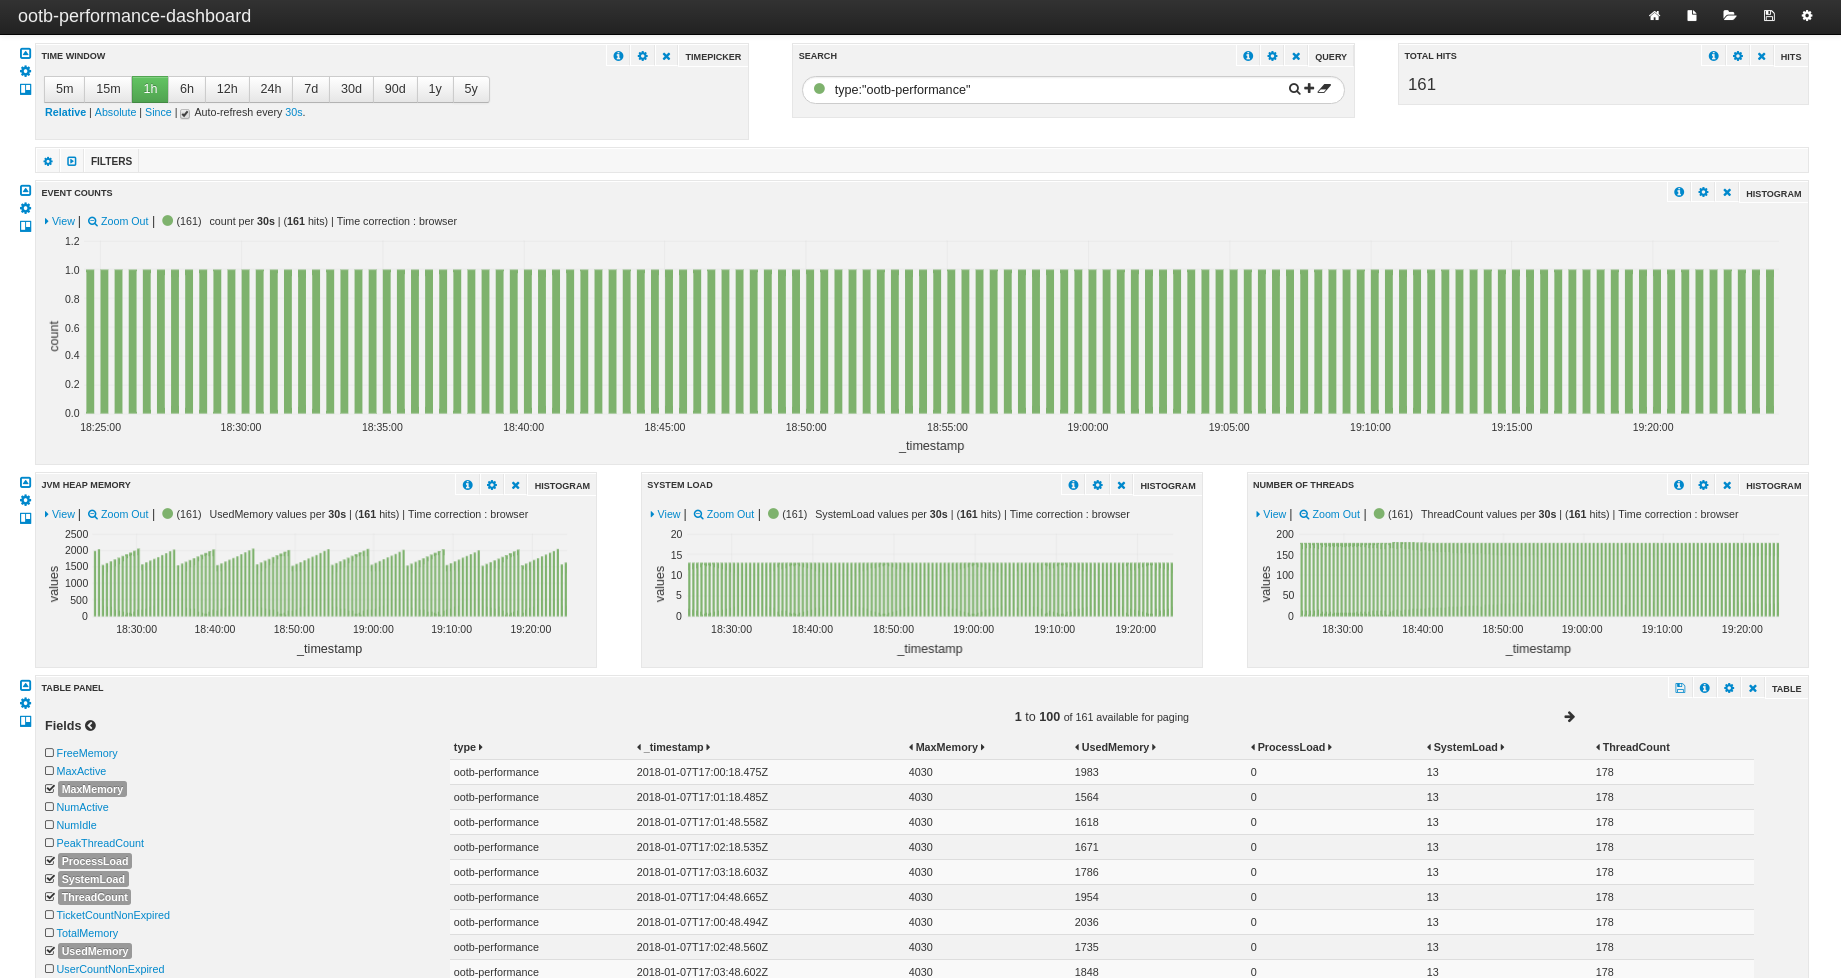 More on monitoring dashboards for Alfresco using SOLR, Banana and Apache Zeppelin